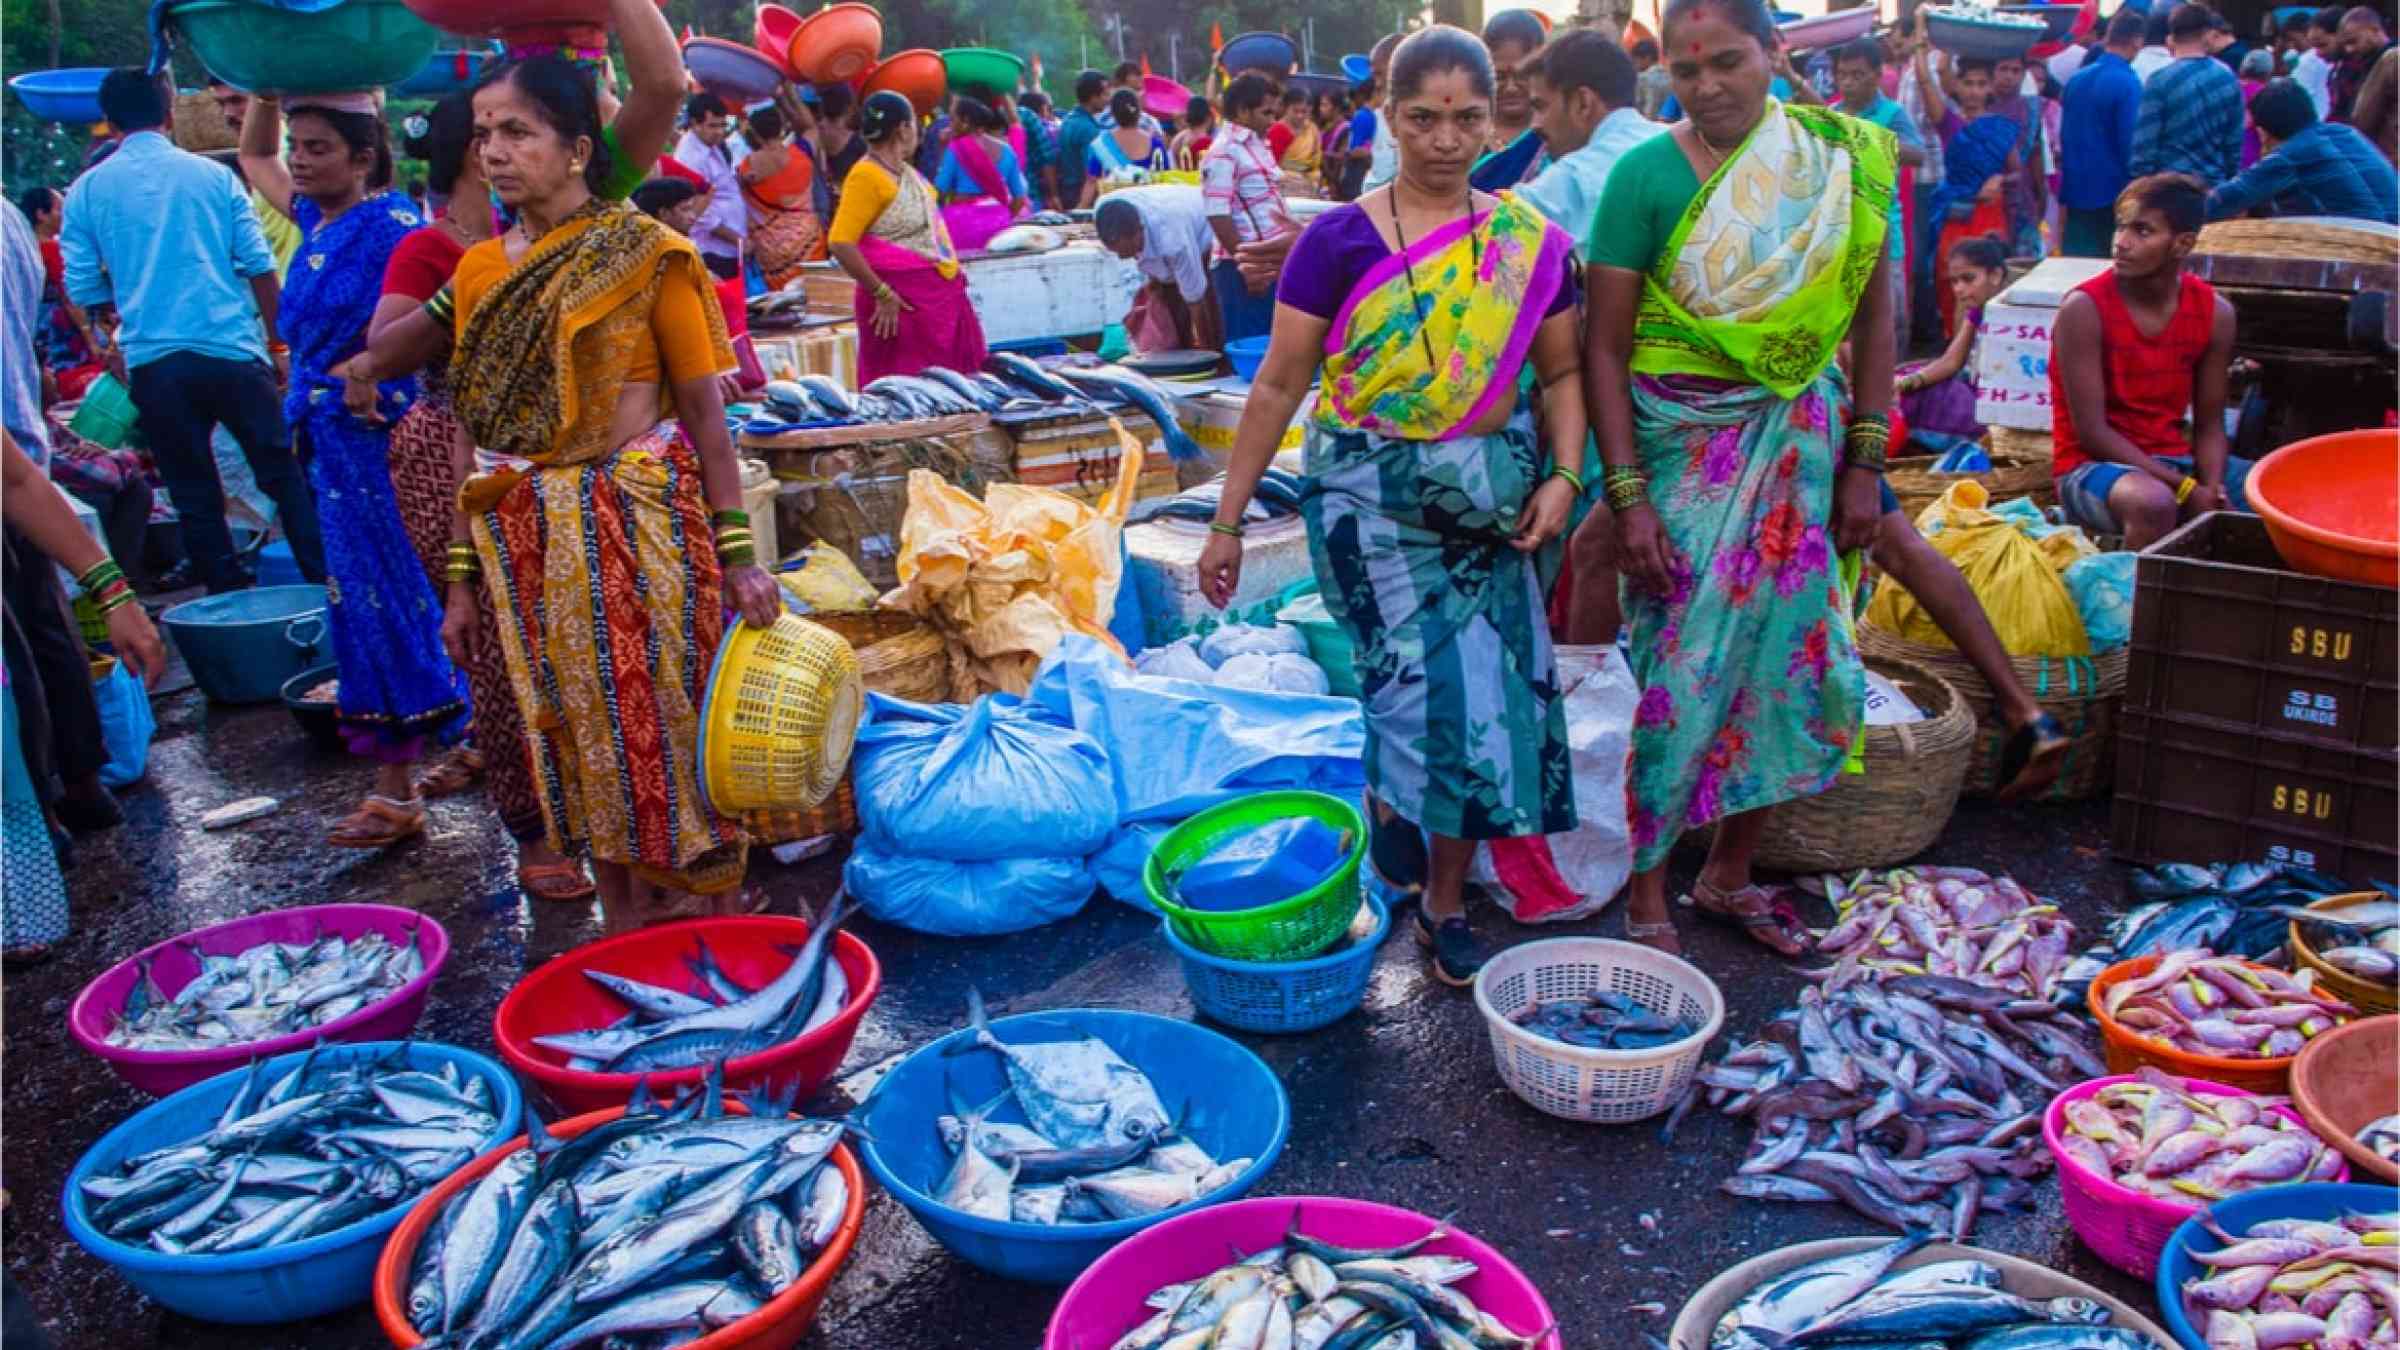 Indian women dressed in colorful clothes selling fish at a fish market.